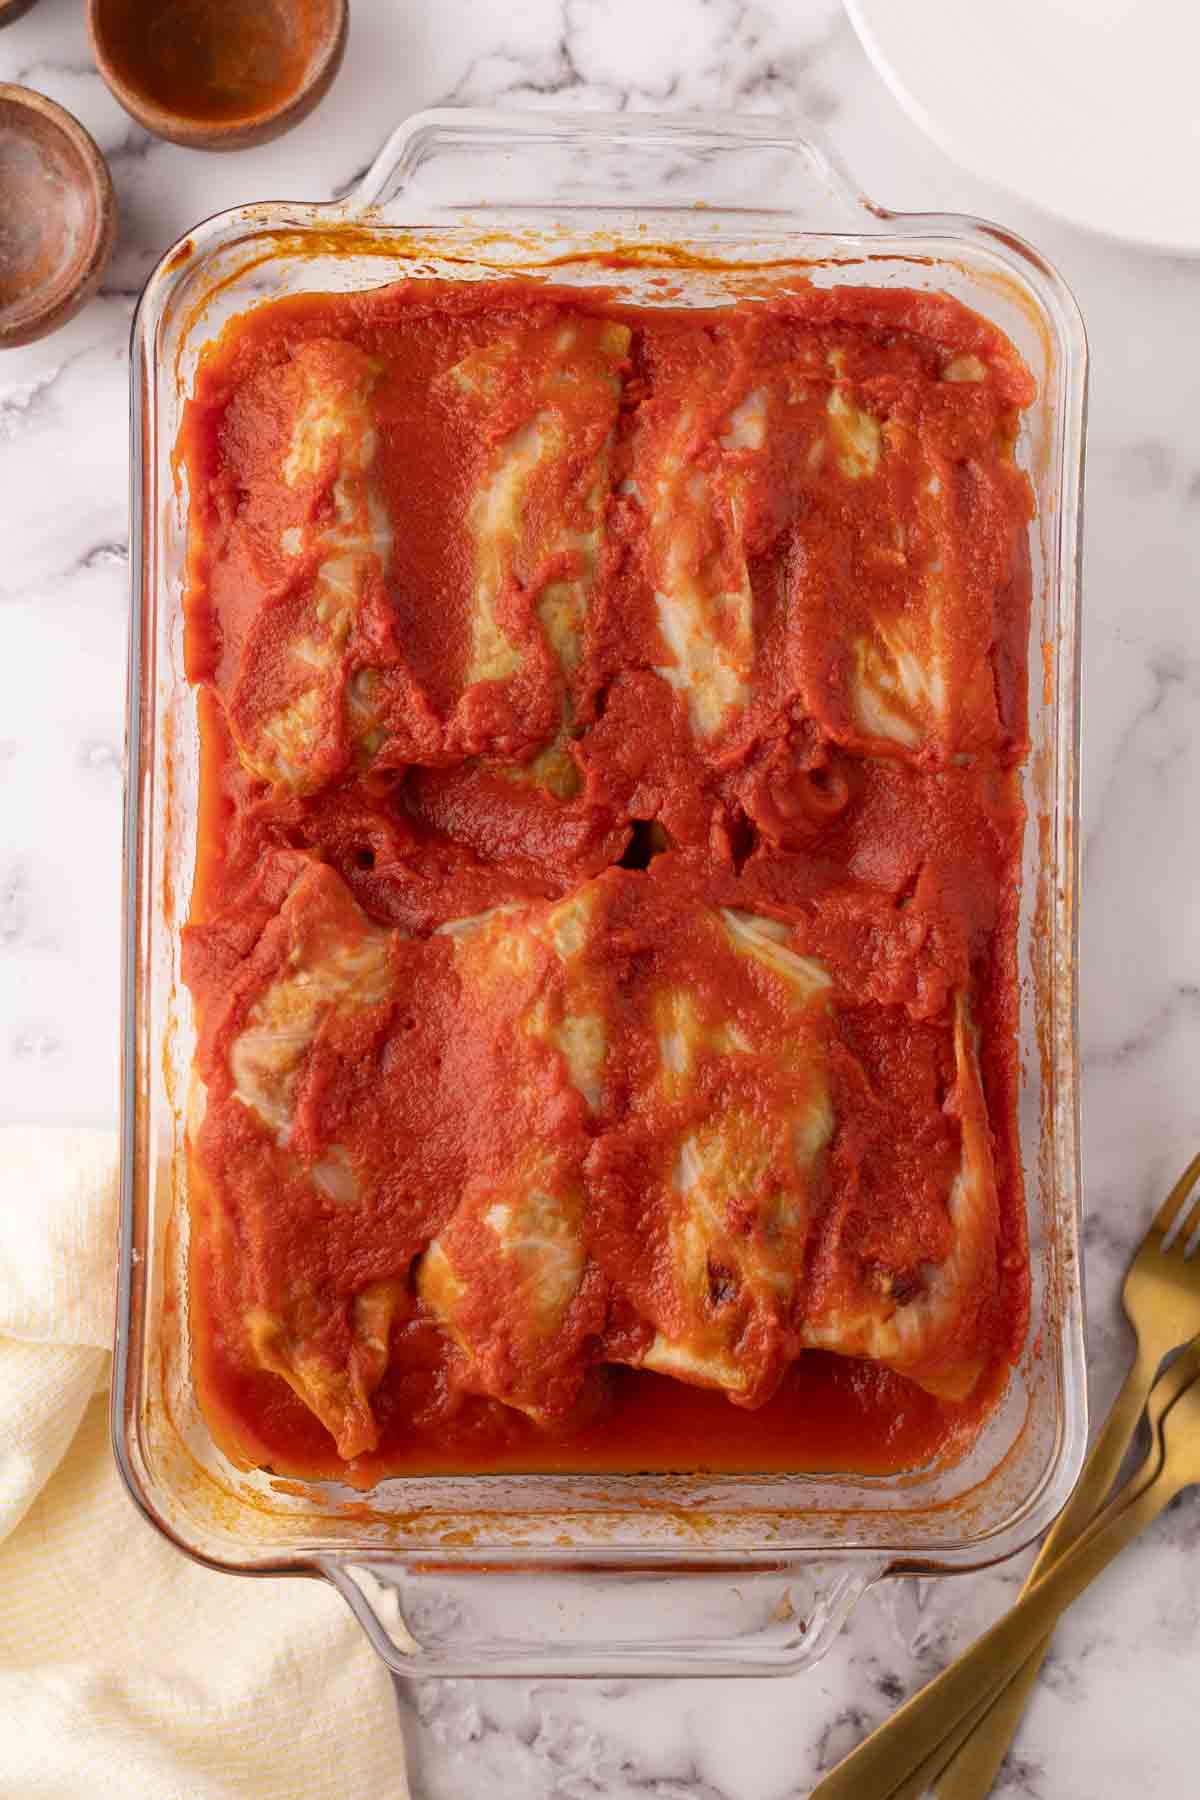 cooked cabbage rolls in a glass baking dish smothered in red sauce.